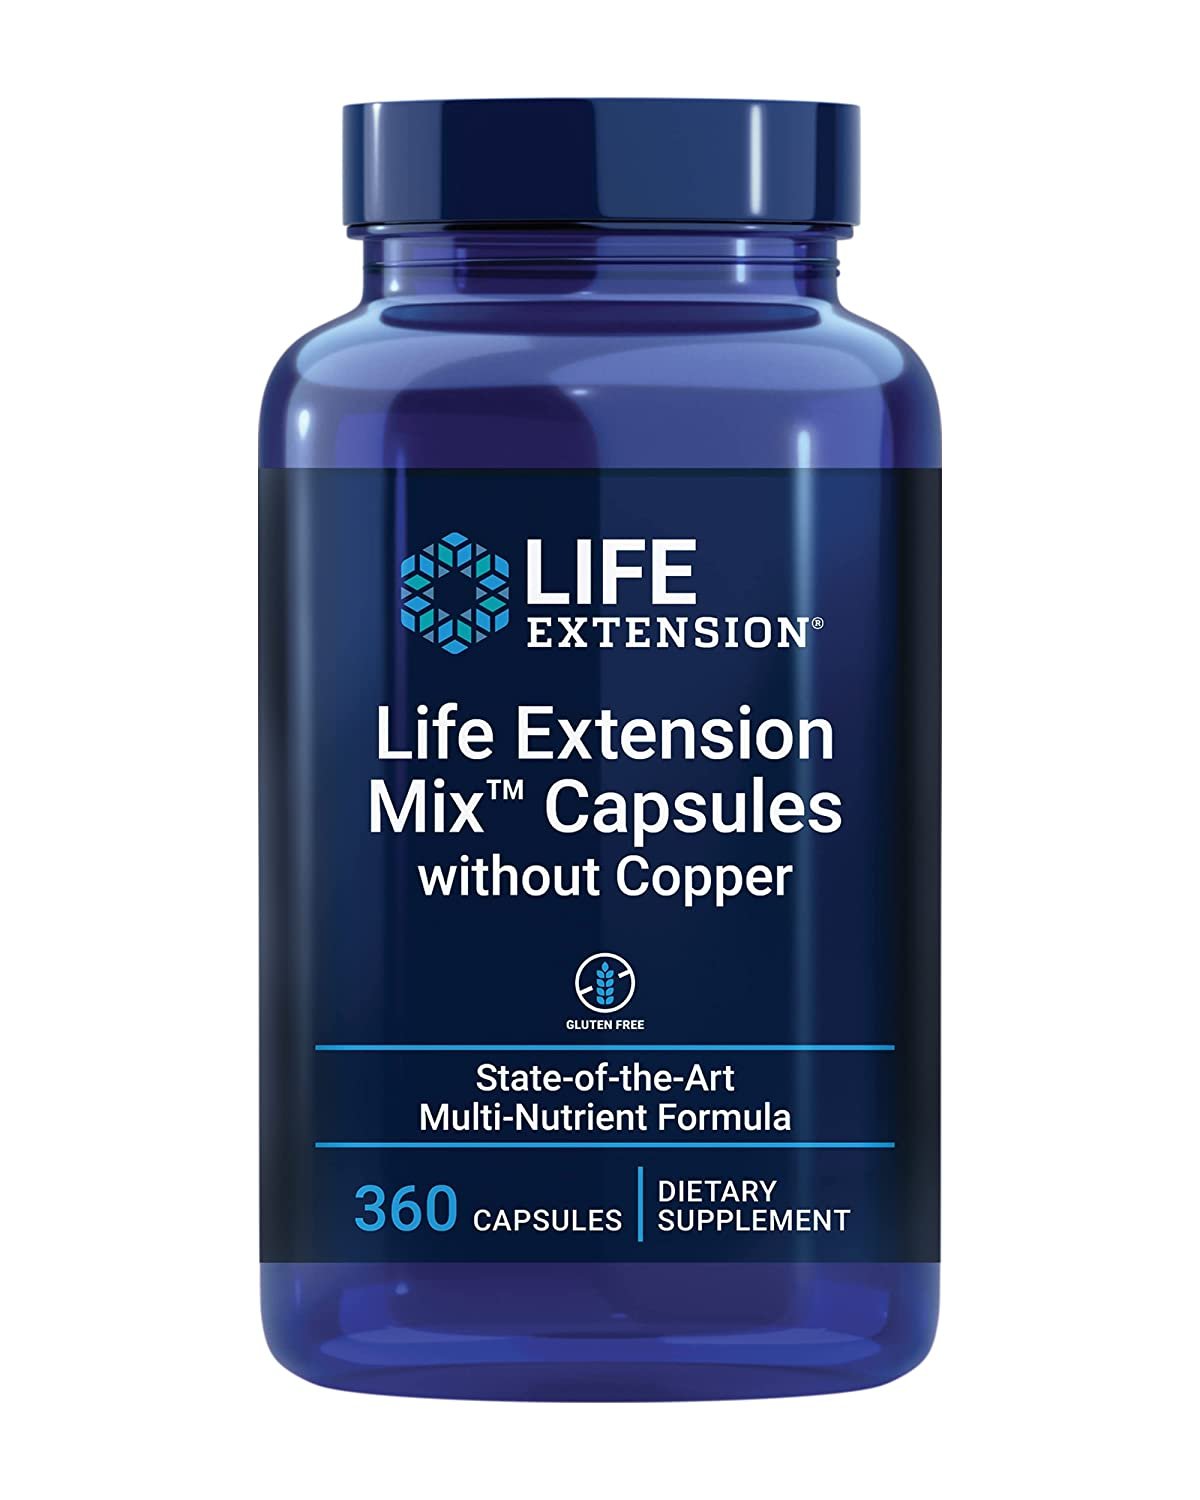 Life Extension Mix Capsules without Copper - High-Potency Vitamin, Mineral, Fruit & Vegetable Supplement - Complete Daily Veggies Blend Pills For Whole Body Health Support - Gluten Free - 360 Counts